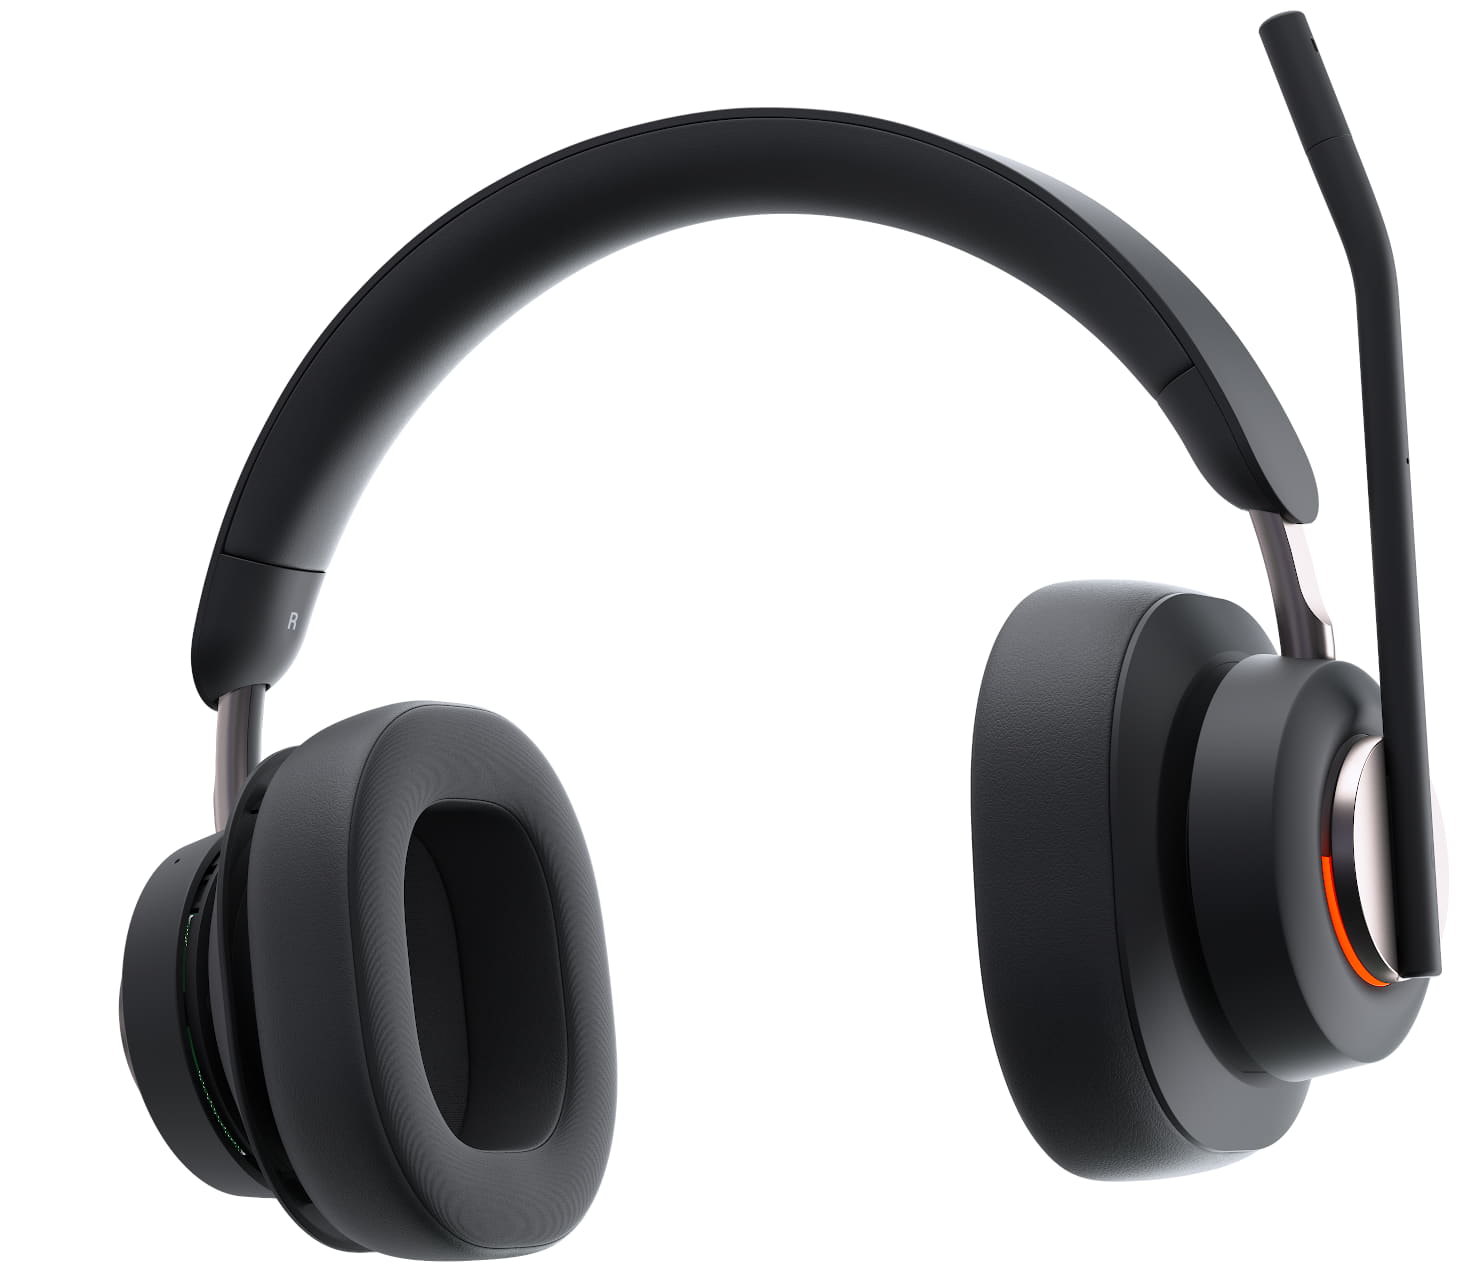 Close up front view of Kensington H3000 Bluetooth Over-Ear Headset with busy light illuminated, mic in flip-to-mute position and right ear cup expanding to show technology